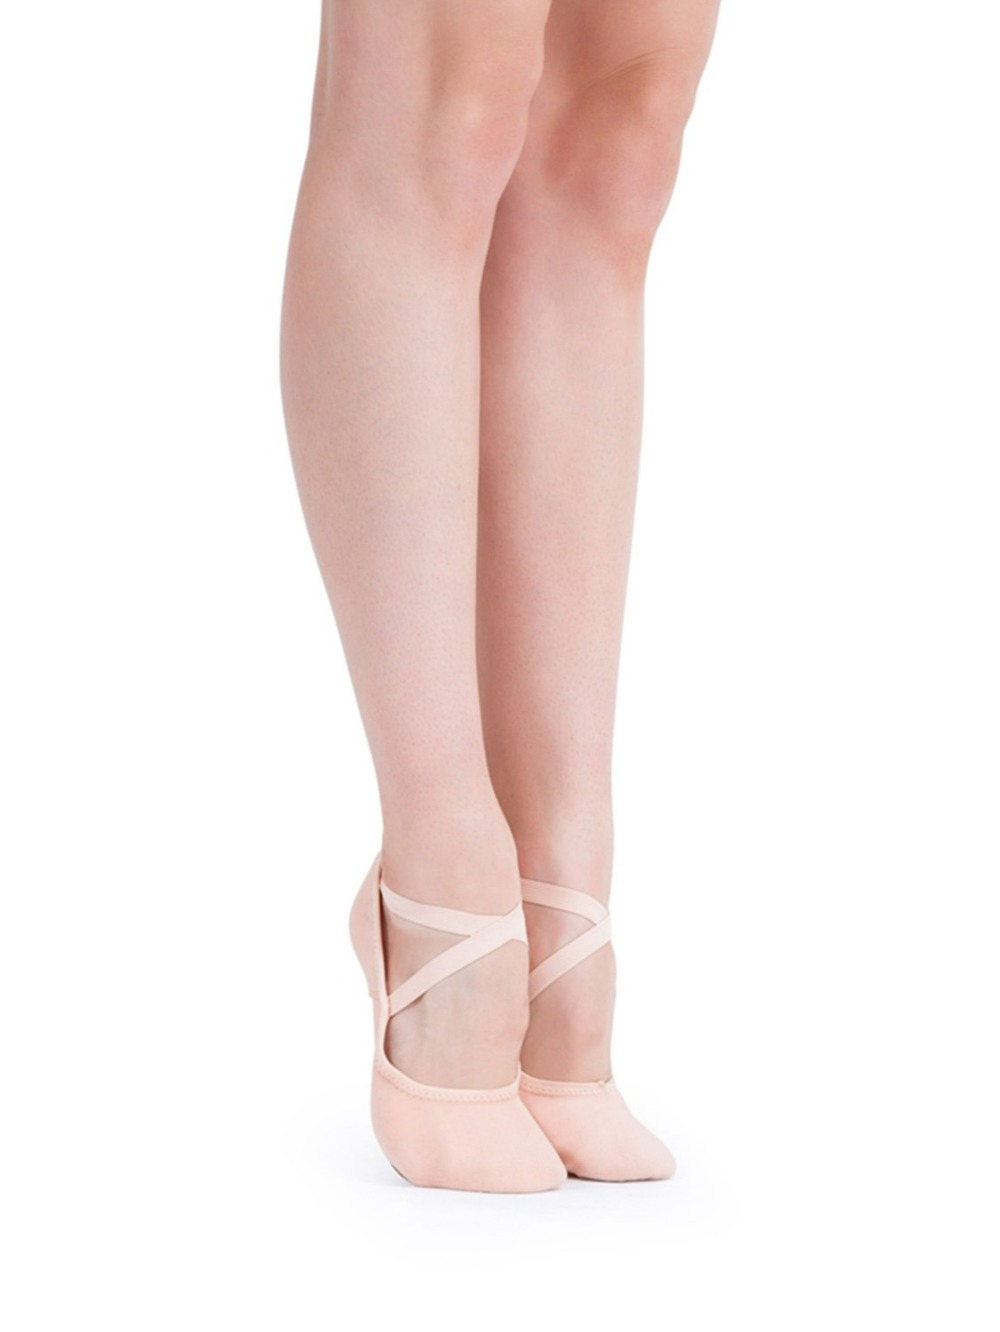 DANCE STRETCH BALLET SHOES - NUDE